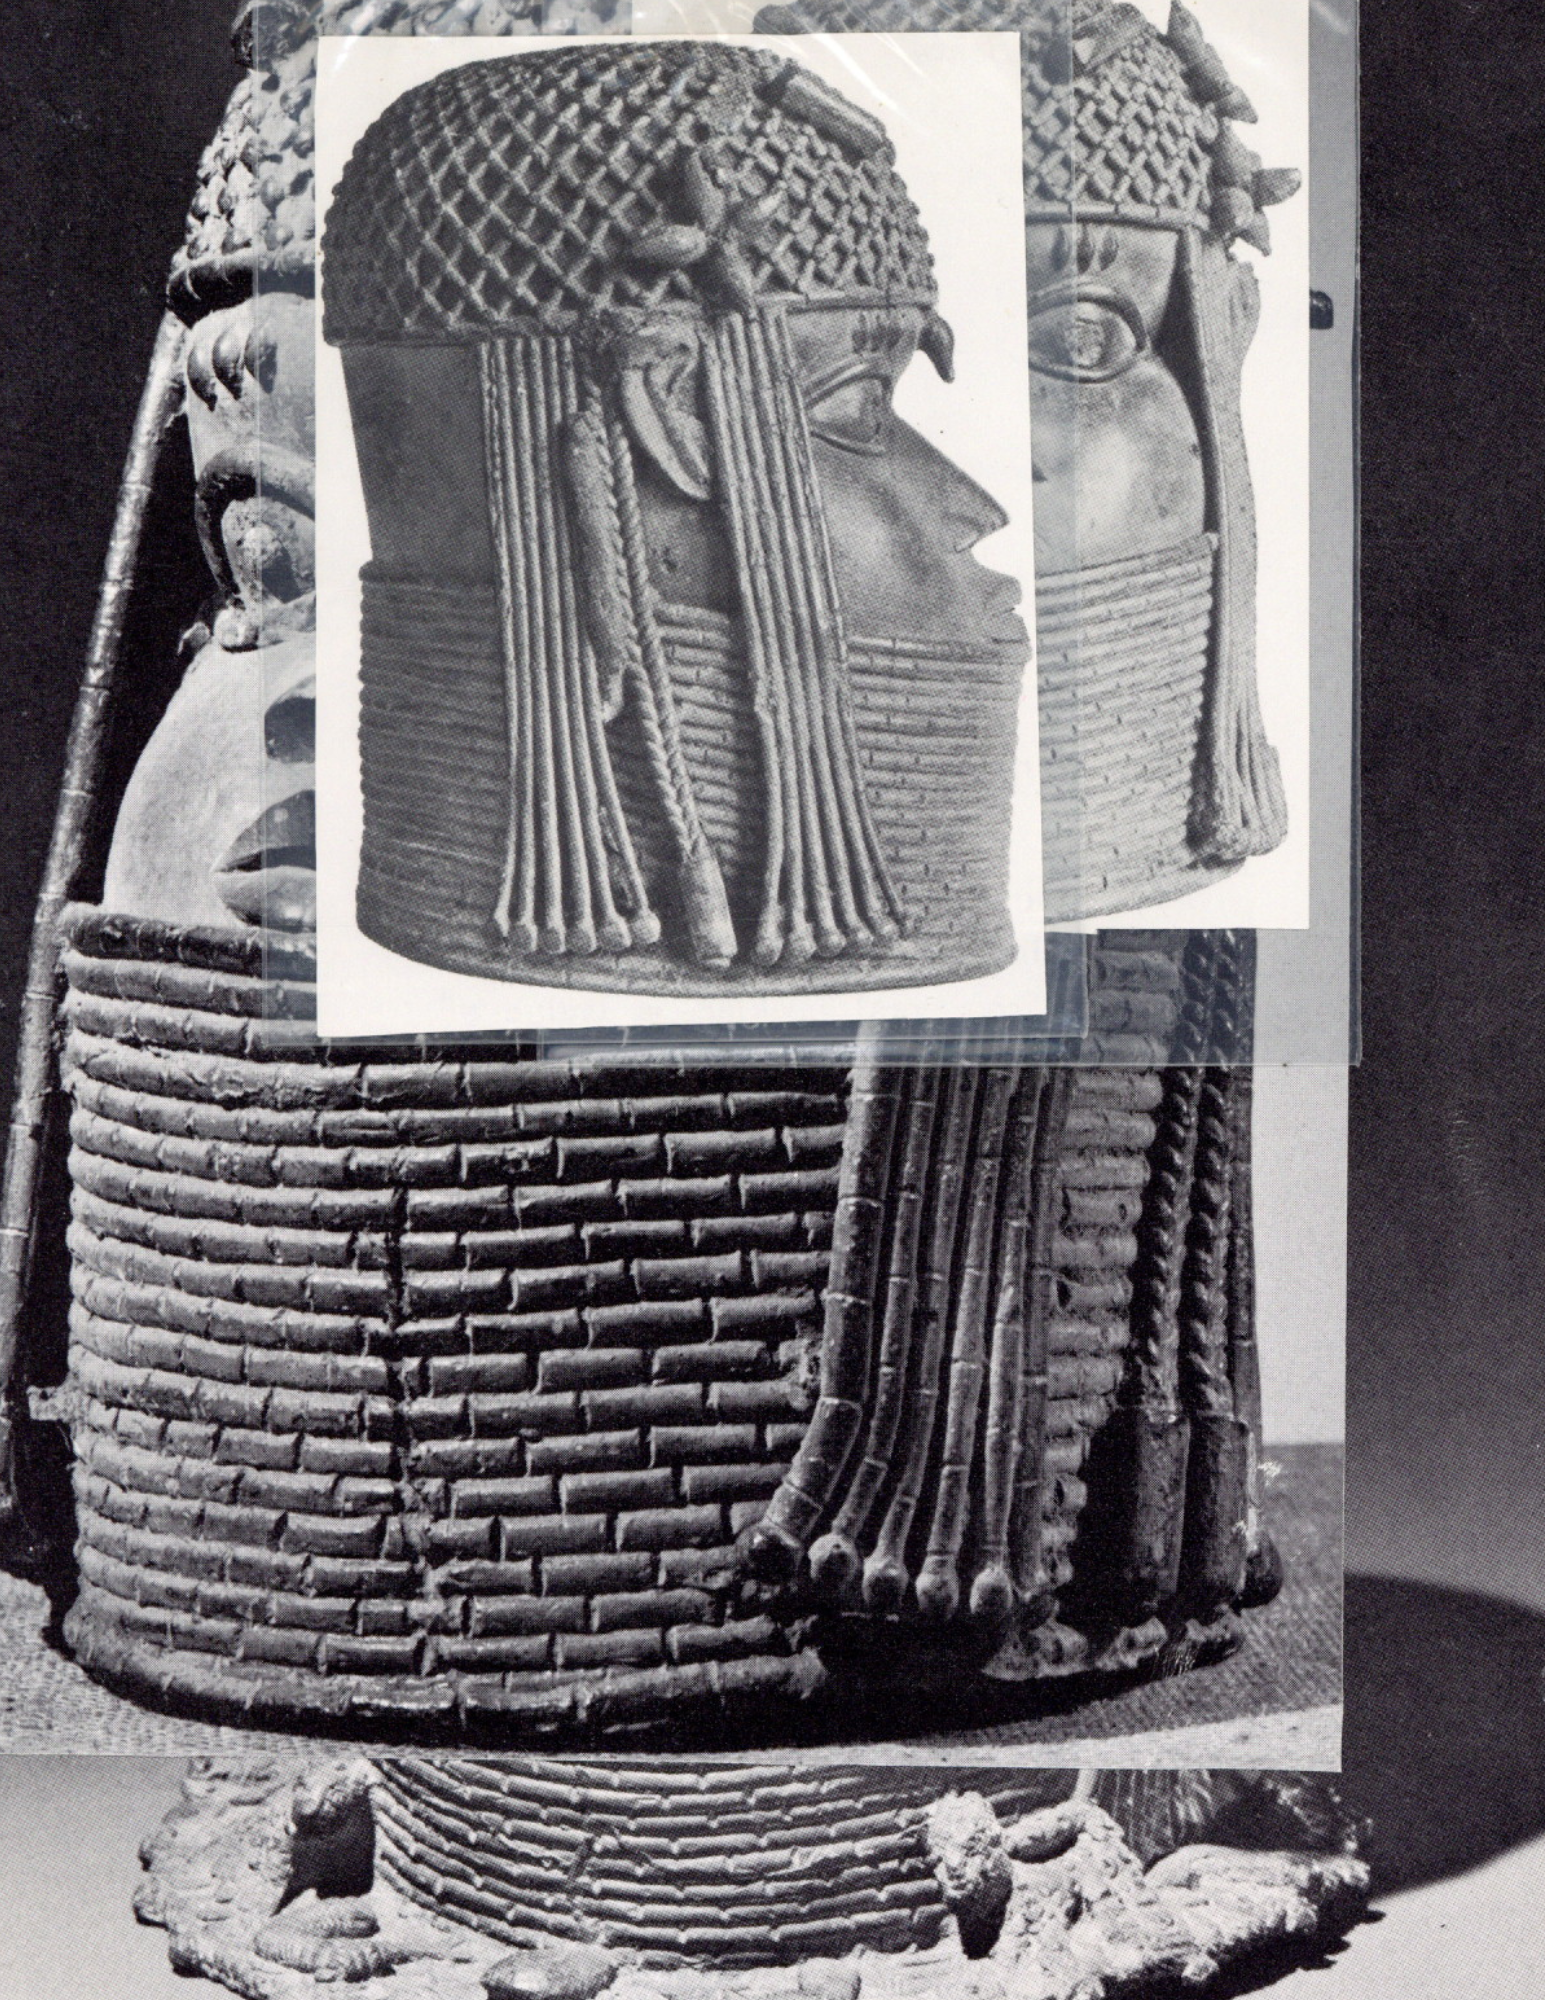 A digital collage of three black-and-white images of Benin Bronzes superimposed over each other. The sculpture depicts a human head and face ornamented by a high neck collar and a hat similar in style and shape to a helmet.